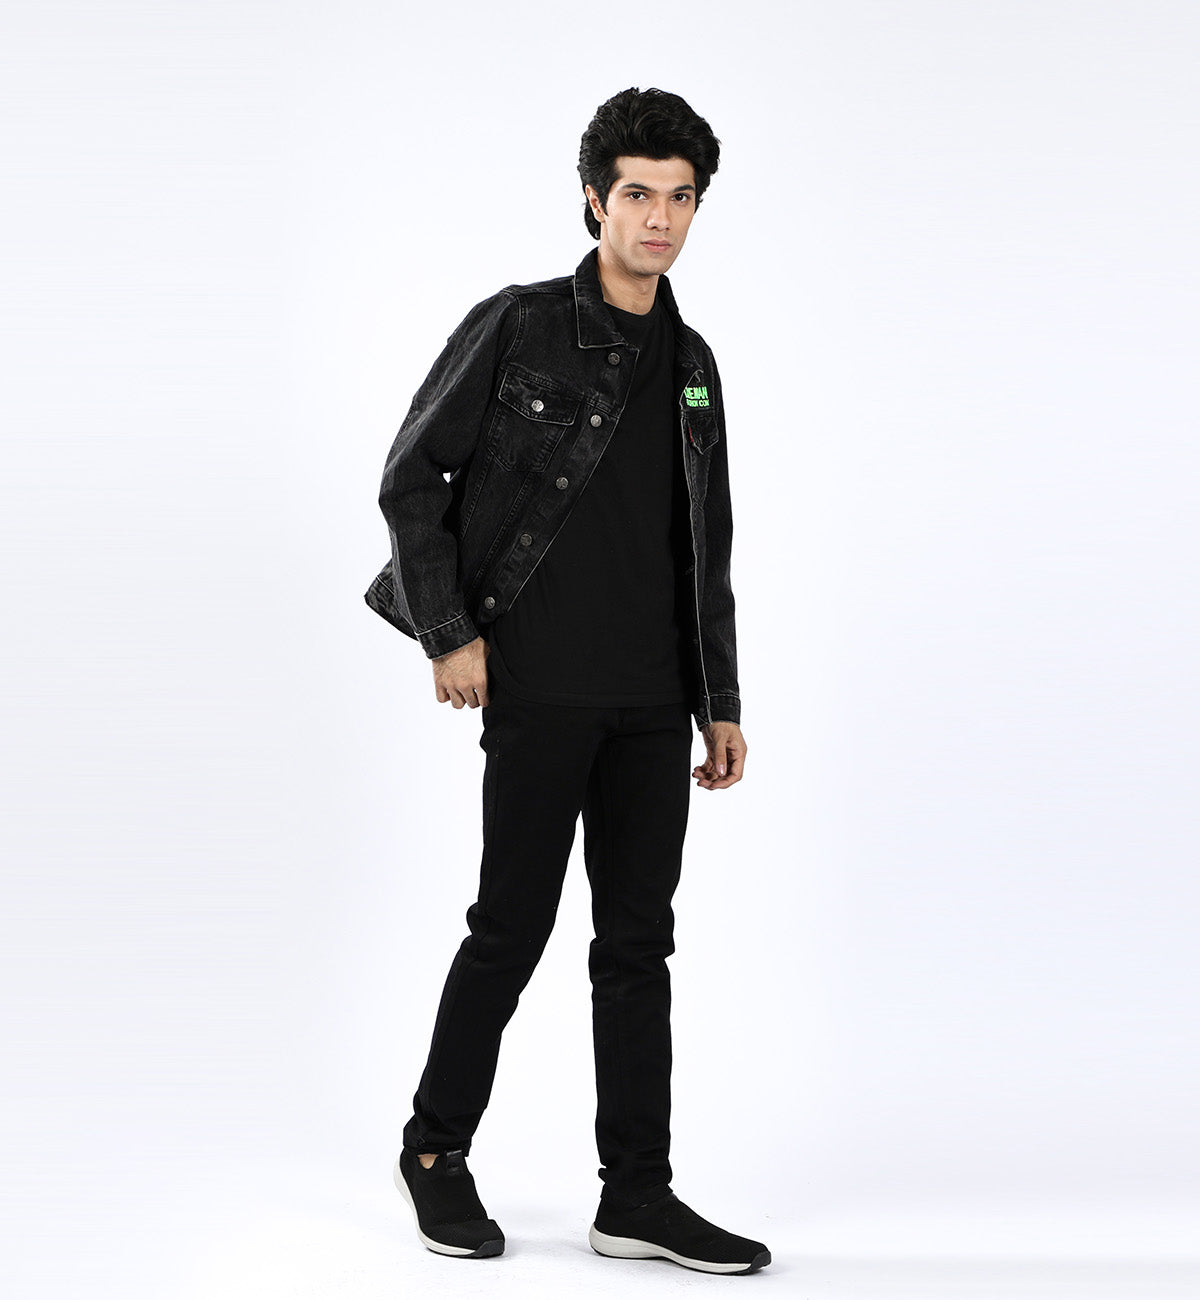 Embroidered Jacket Black – ONE